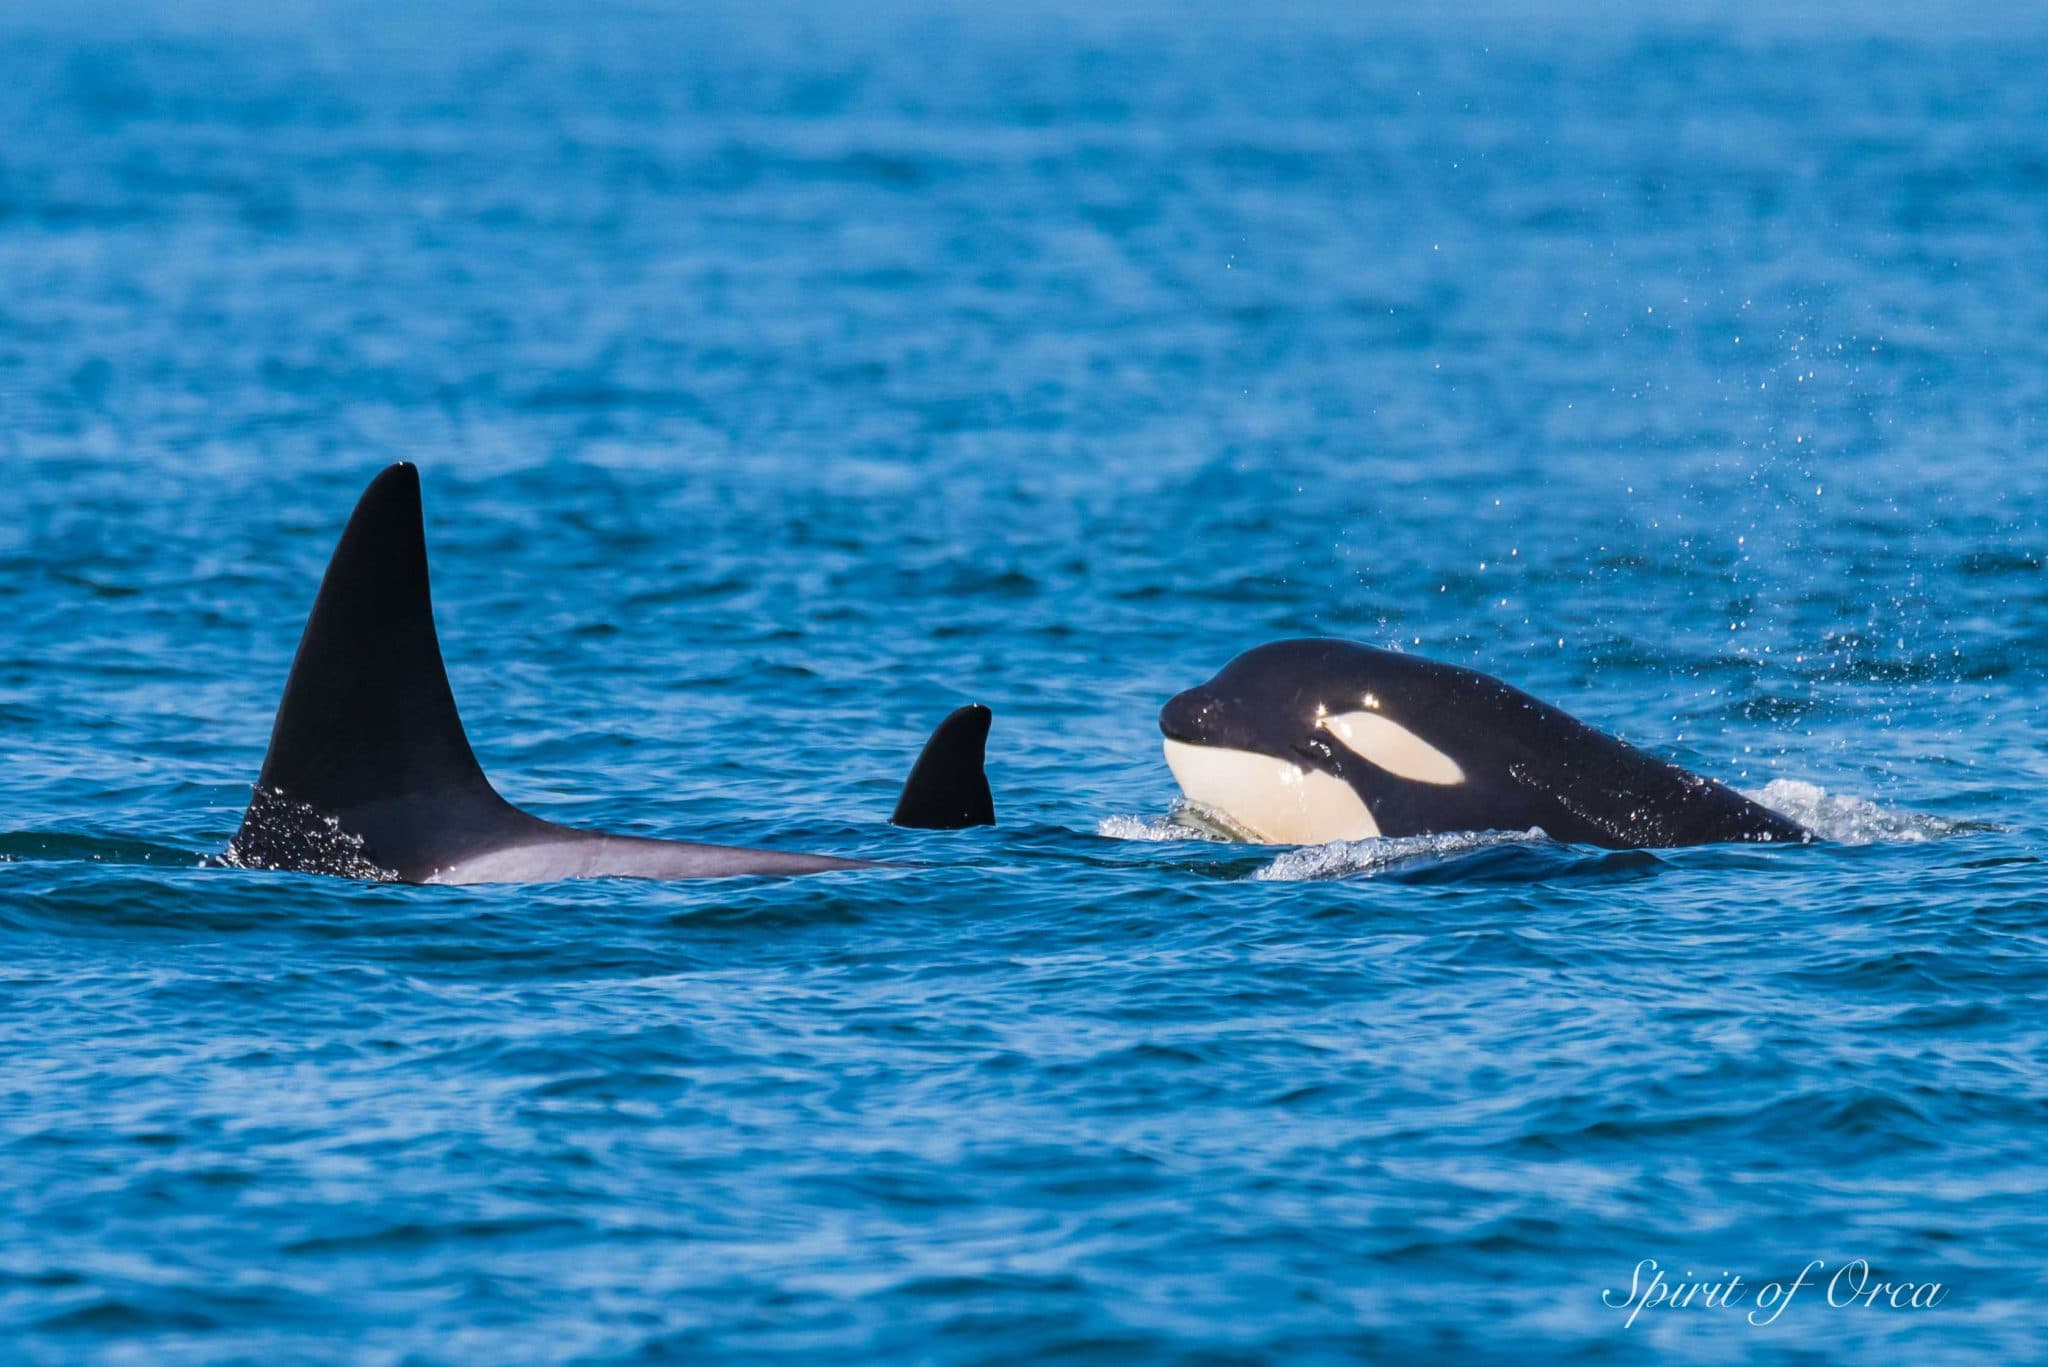 Three Pods of Orca